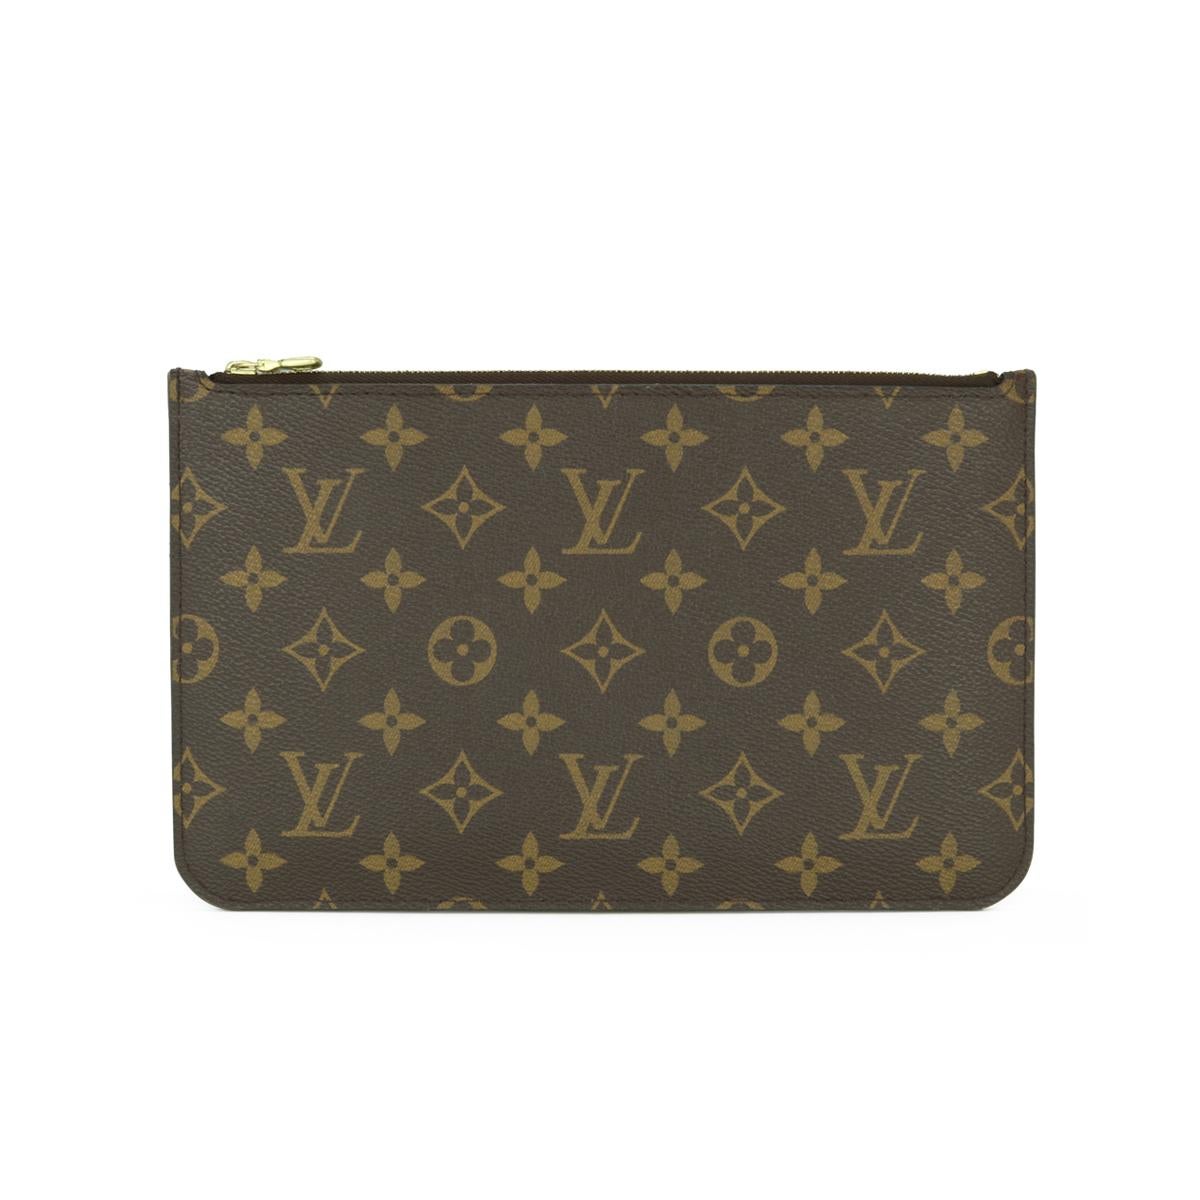 Louis Vuitton Neverfull MM Zip Pochette Pouch in Monogram with Beige Interior 2016.

This pouch is in good condition. 

- Exterior Condition: Good condition. There is inking wear to the corners and two topside endpoints. The calfskin vachette strap